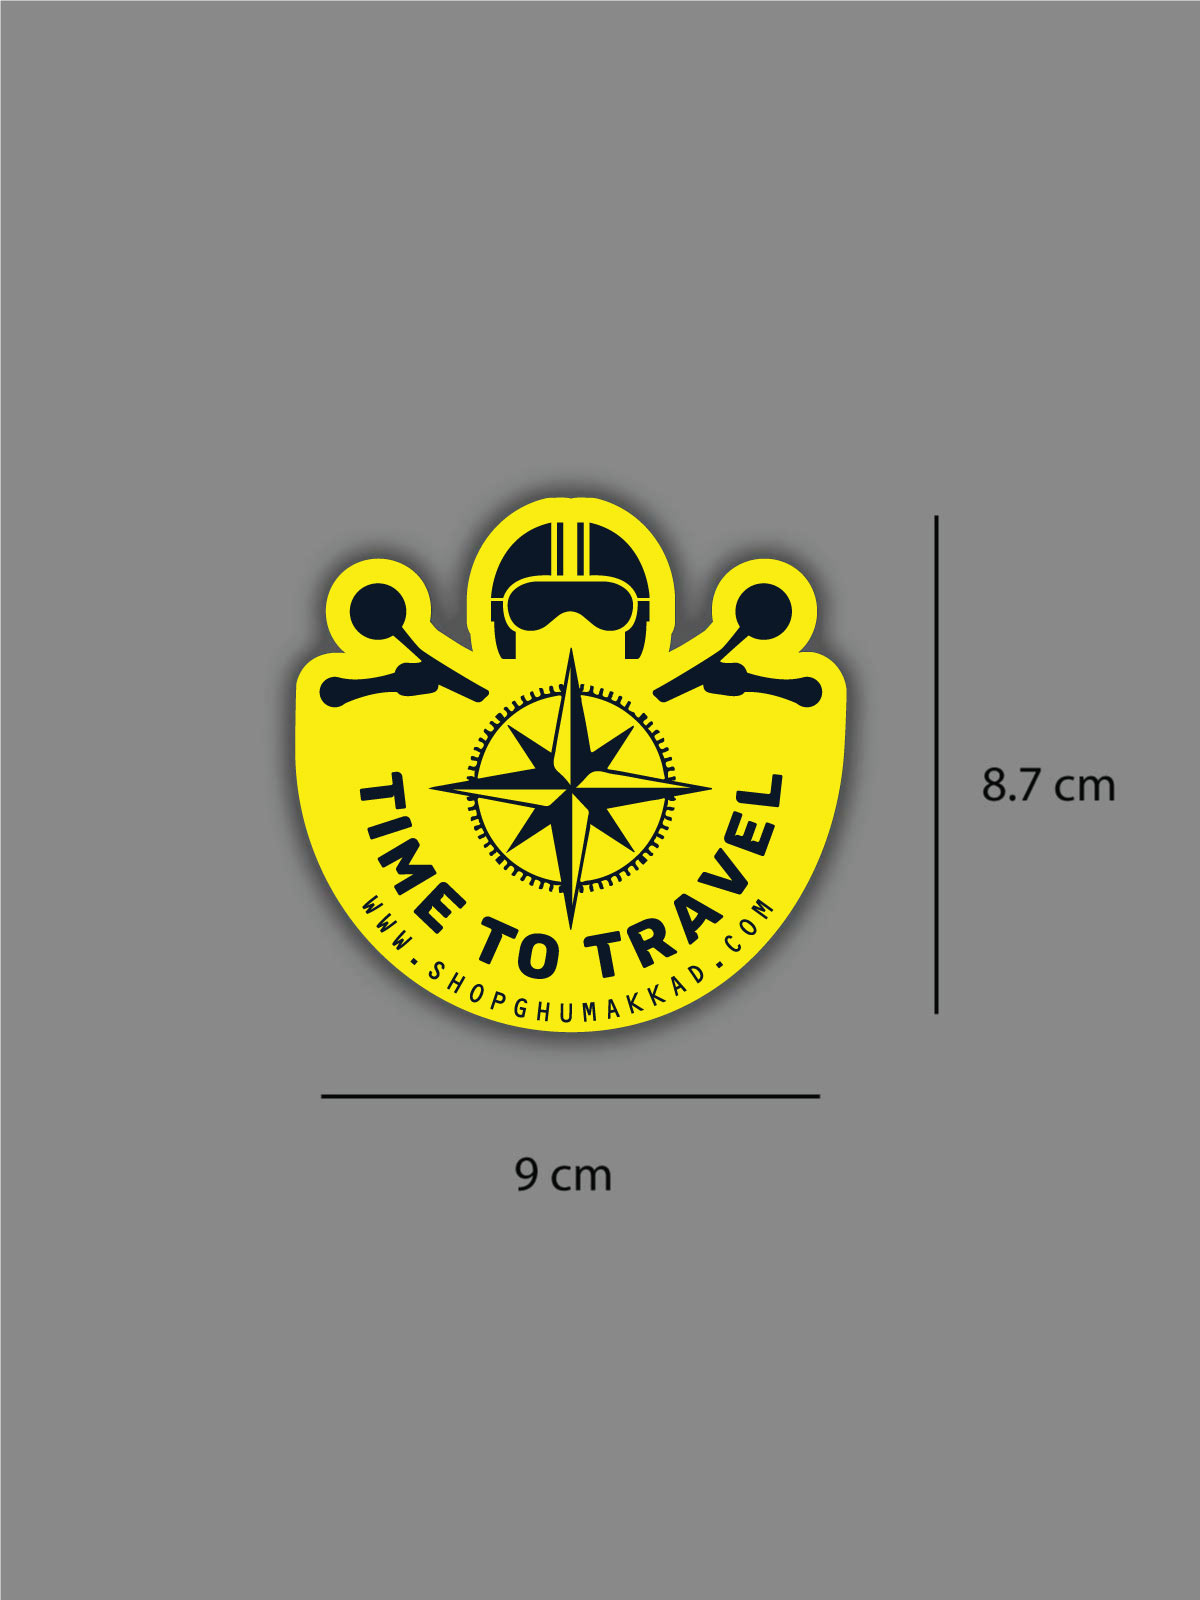 Time to Travel Vinyl Sticker by shopghumakkad | Laptop Stickers | Bumper Stickers | Car Stickers | Bike Stickers